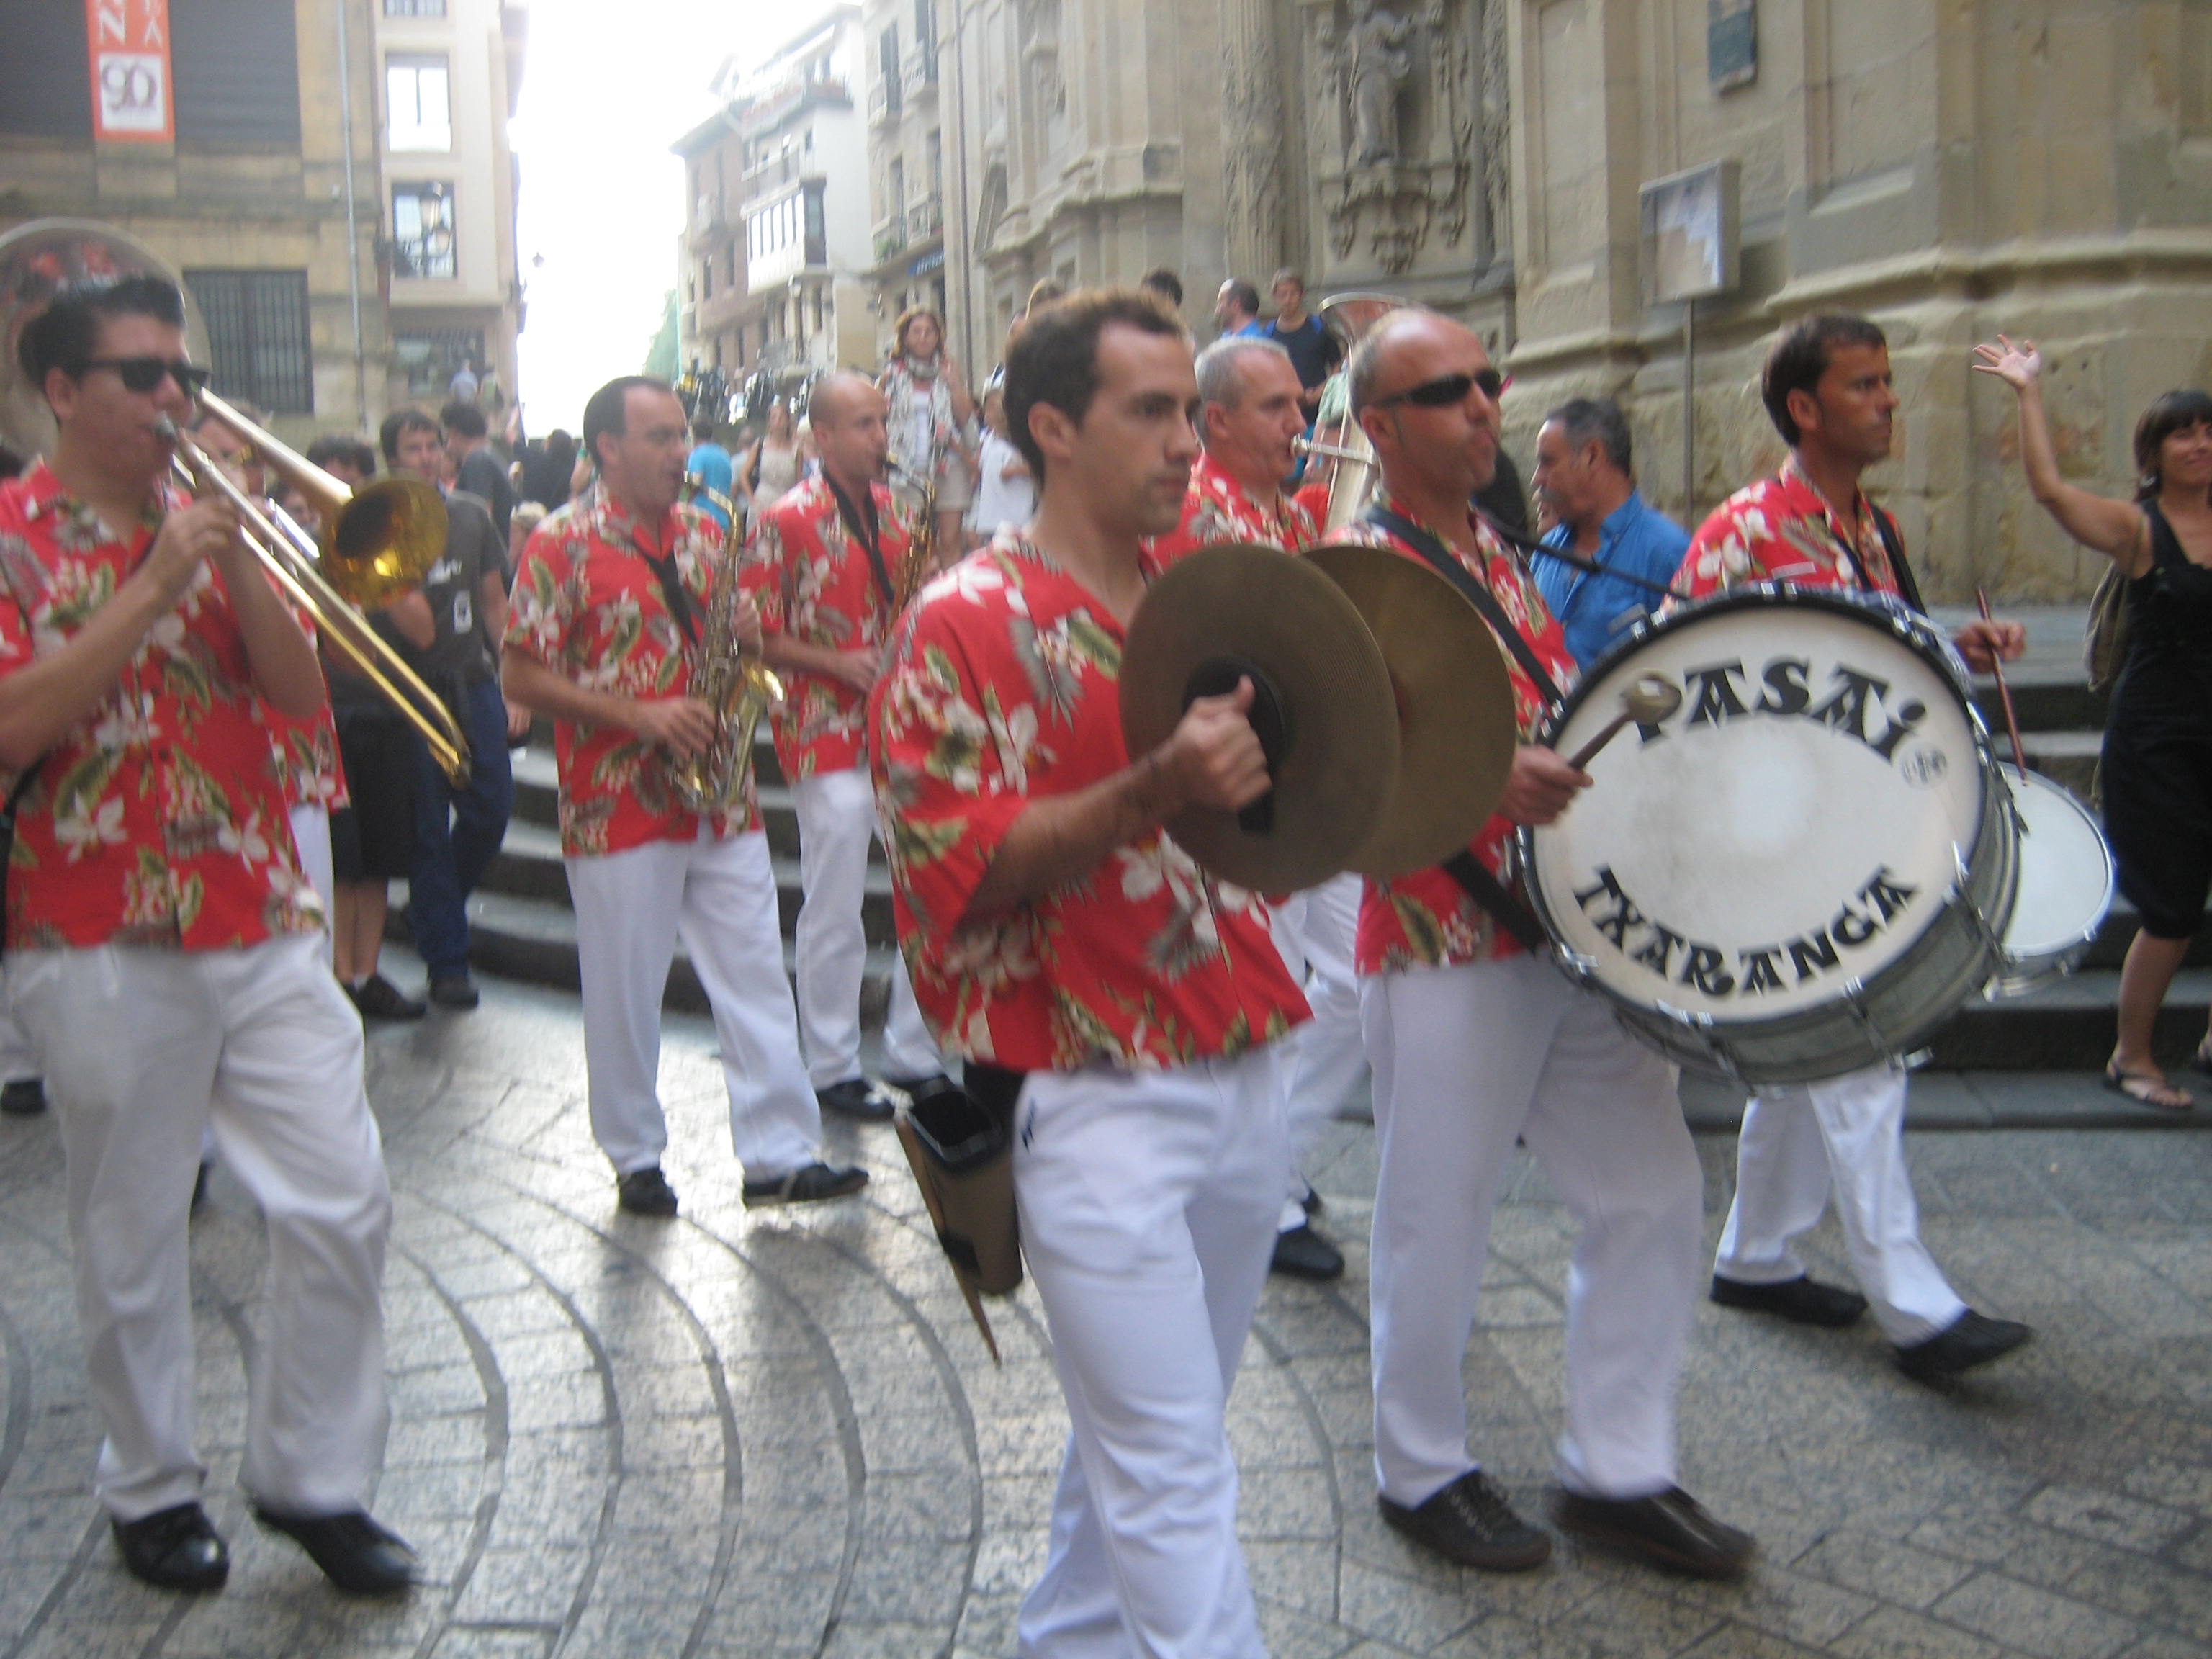 Band playing in the streets of San Sebastian during a summer festival